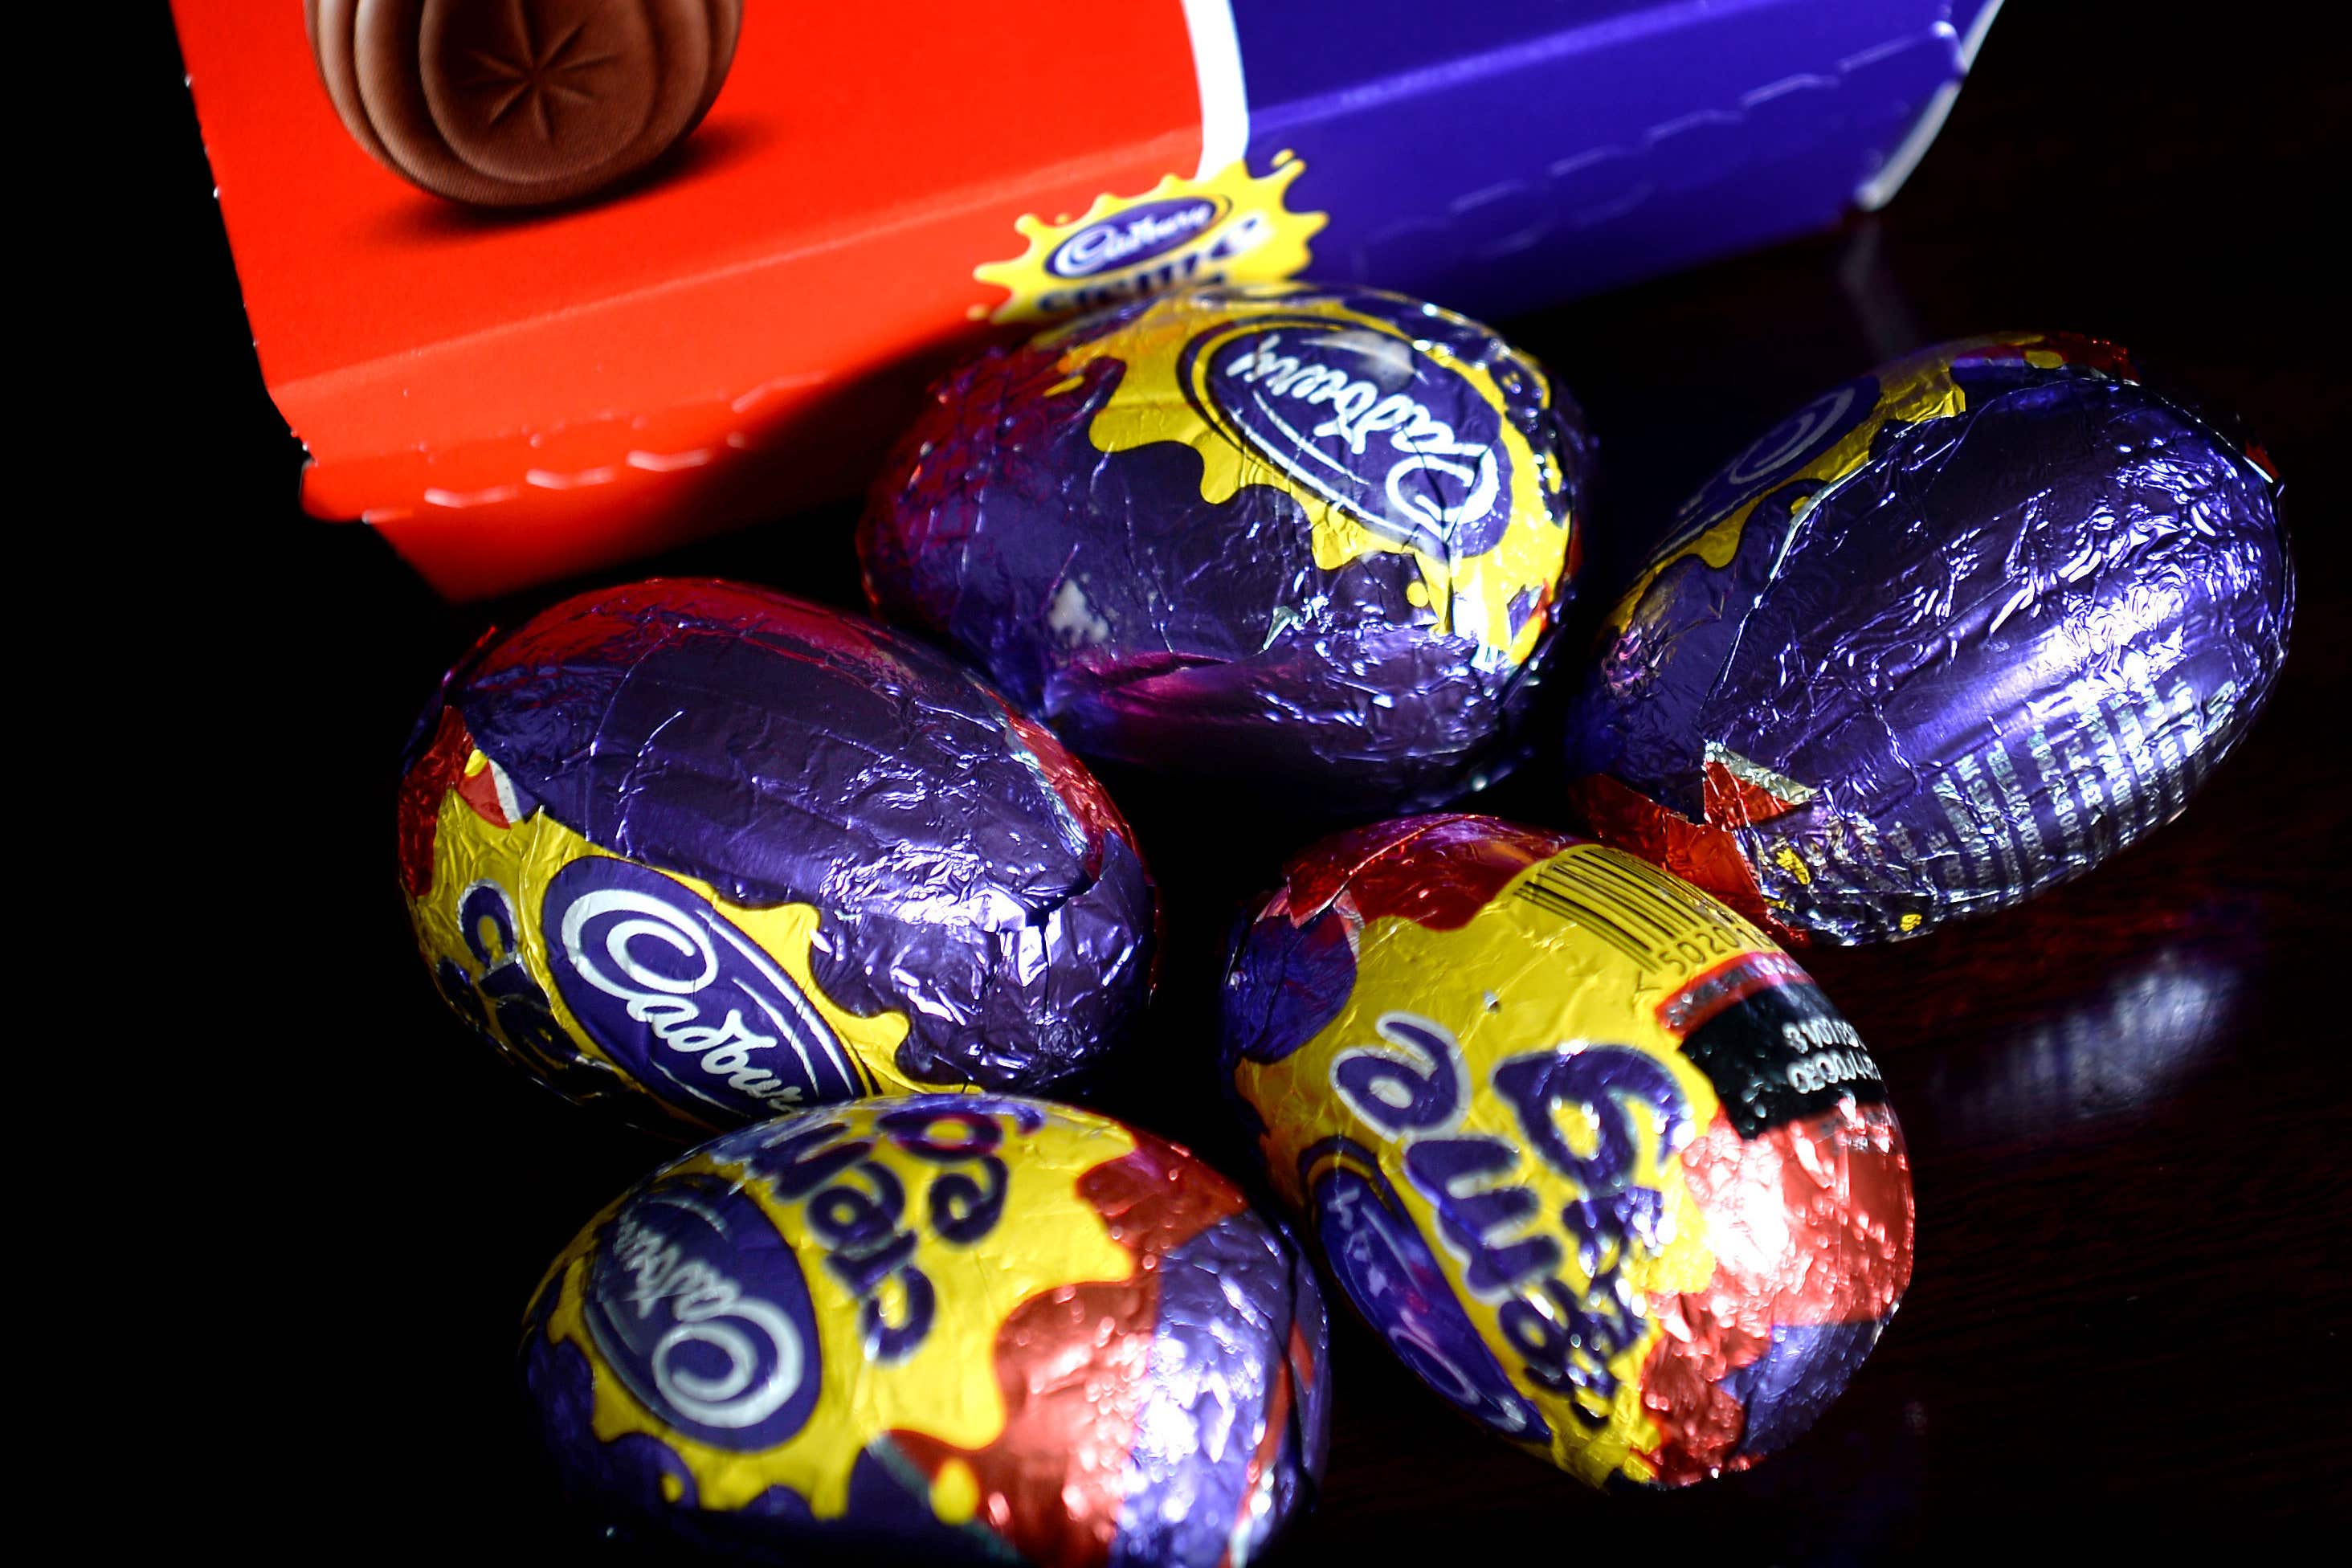 The Creme Eggs were worth more than ?31,000